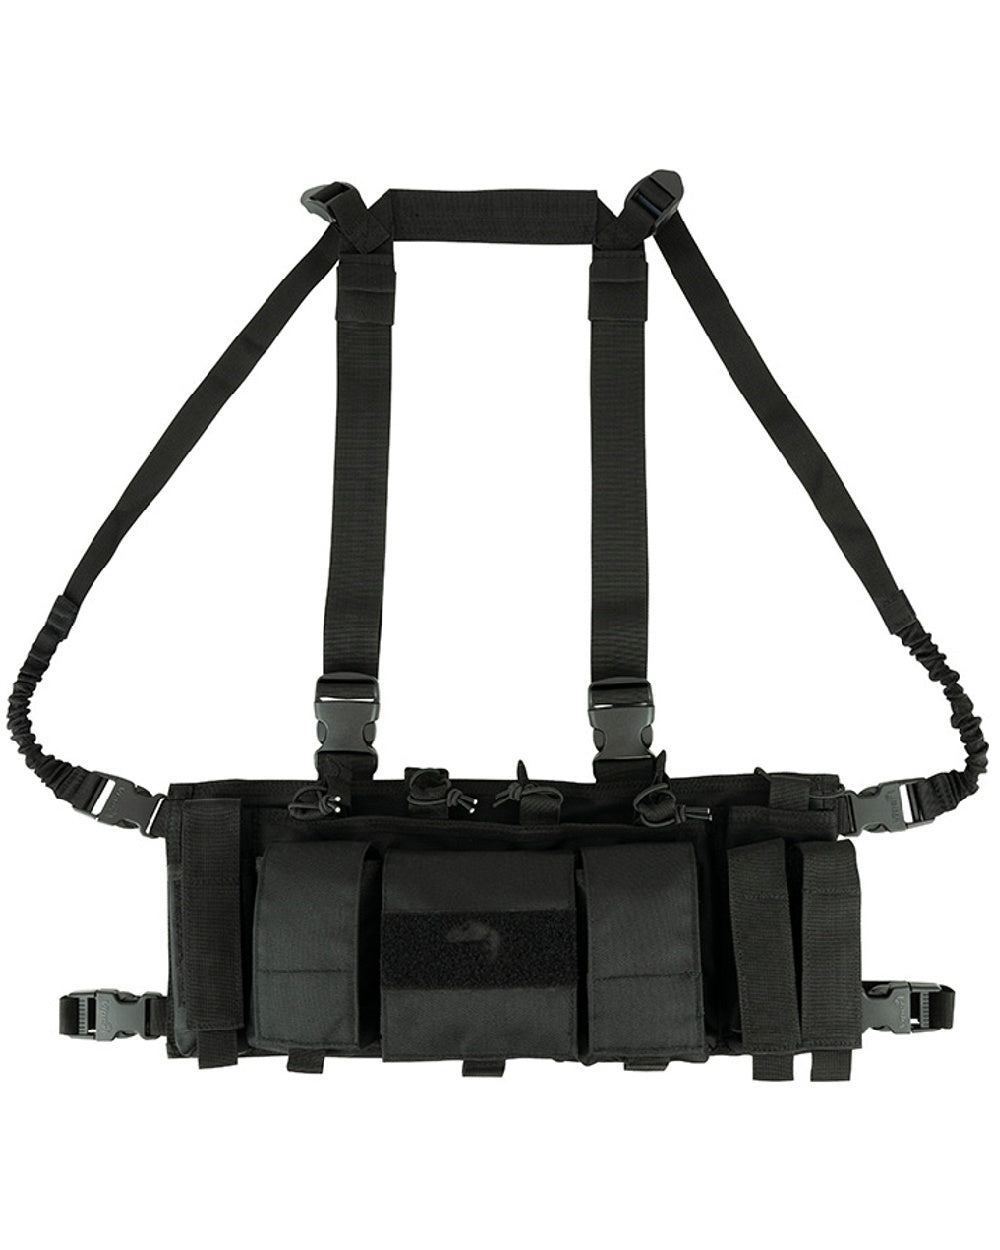 Viper Special Ops Chest Rig in Black 